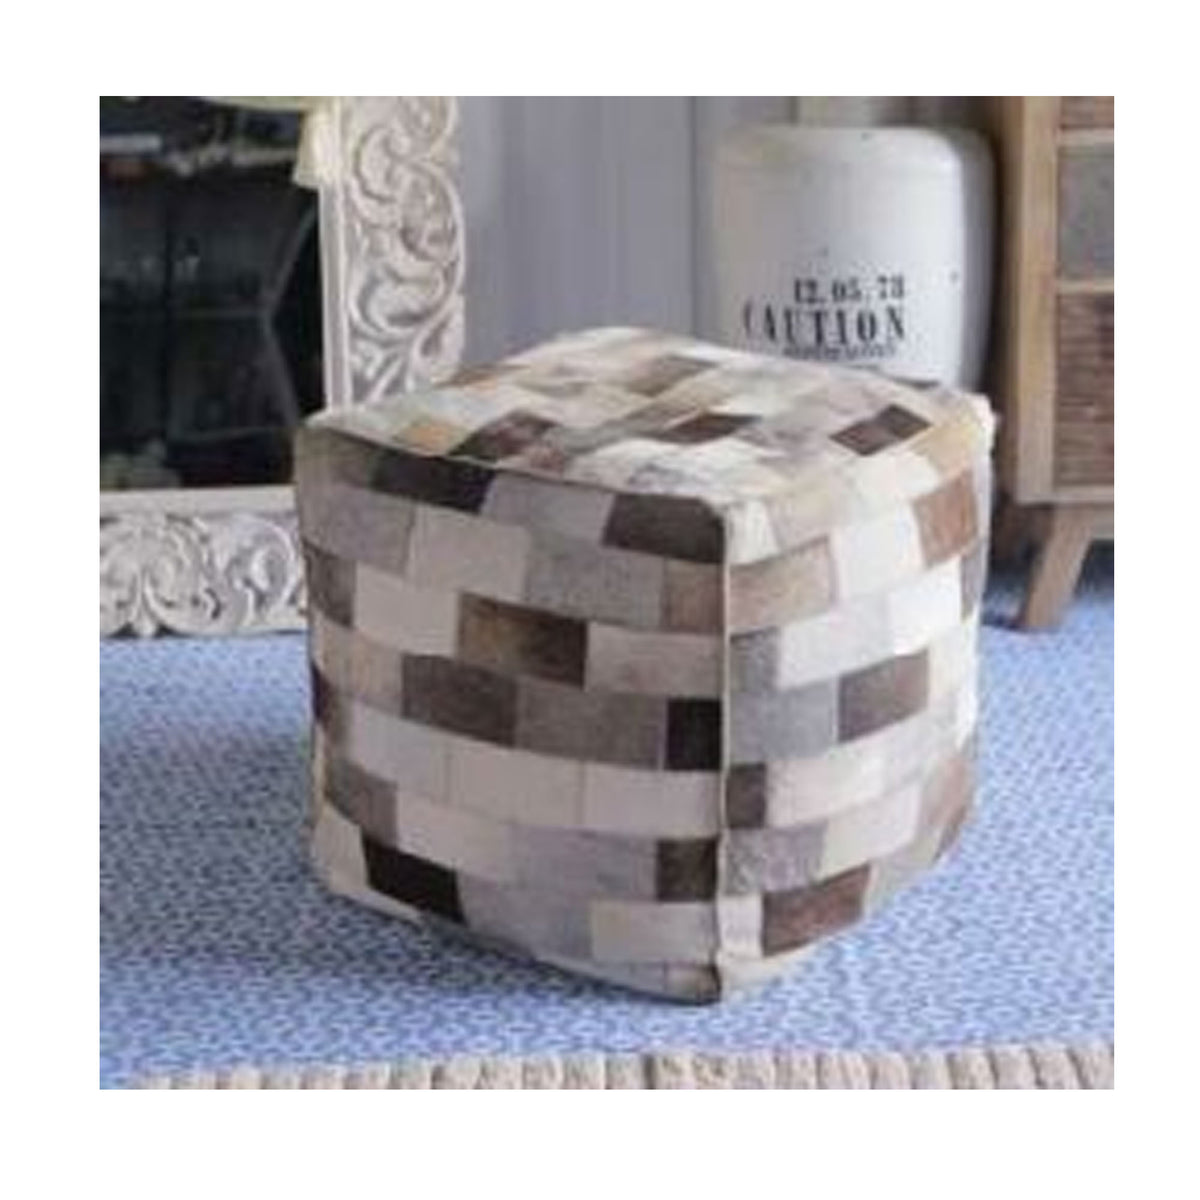 COWHIDE SQUARE PATCH OTTOMAN - Notbrand